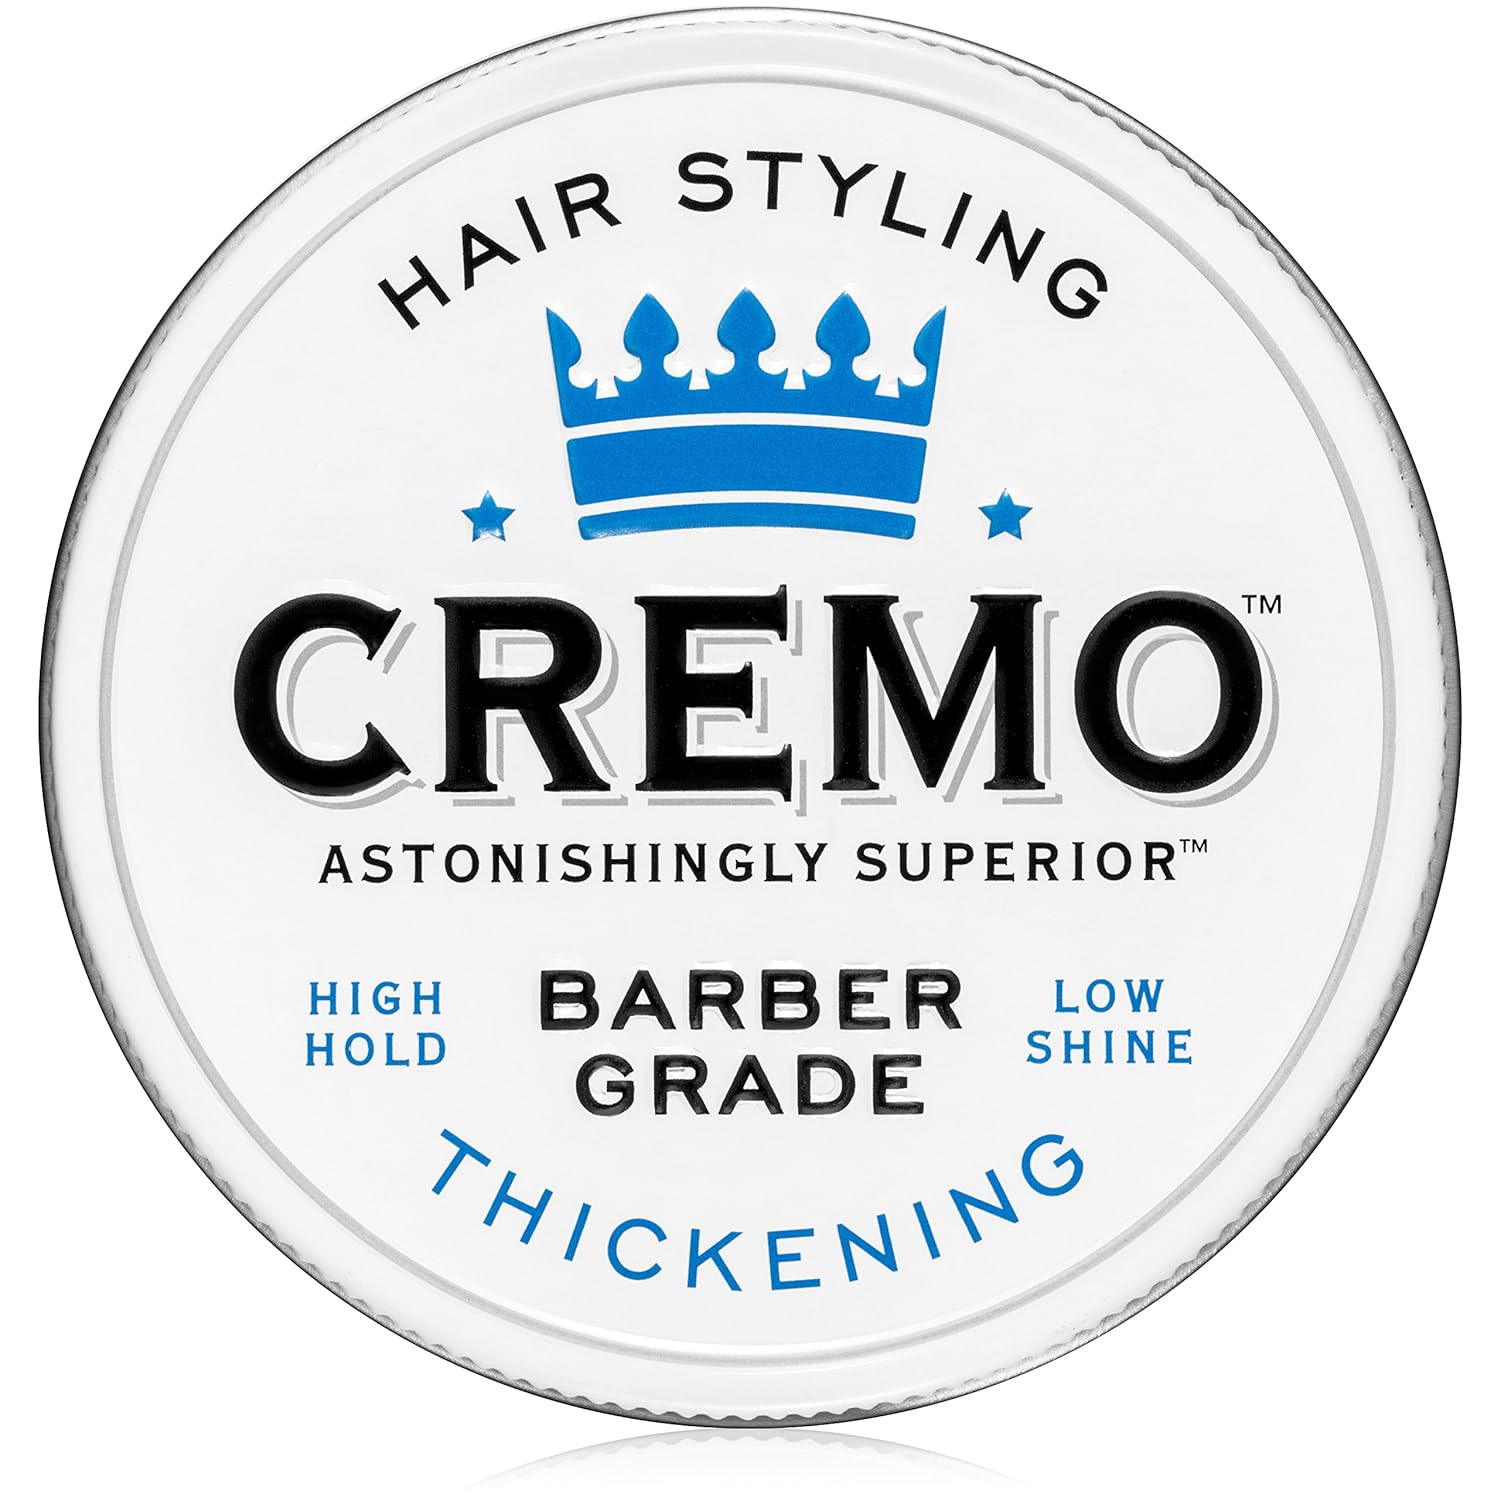 Cremo Premium Barber Grade Hair Styling Thickening Paste, High Hold, Low Shine, 4 Oz : Beauty & Personal Care